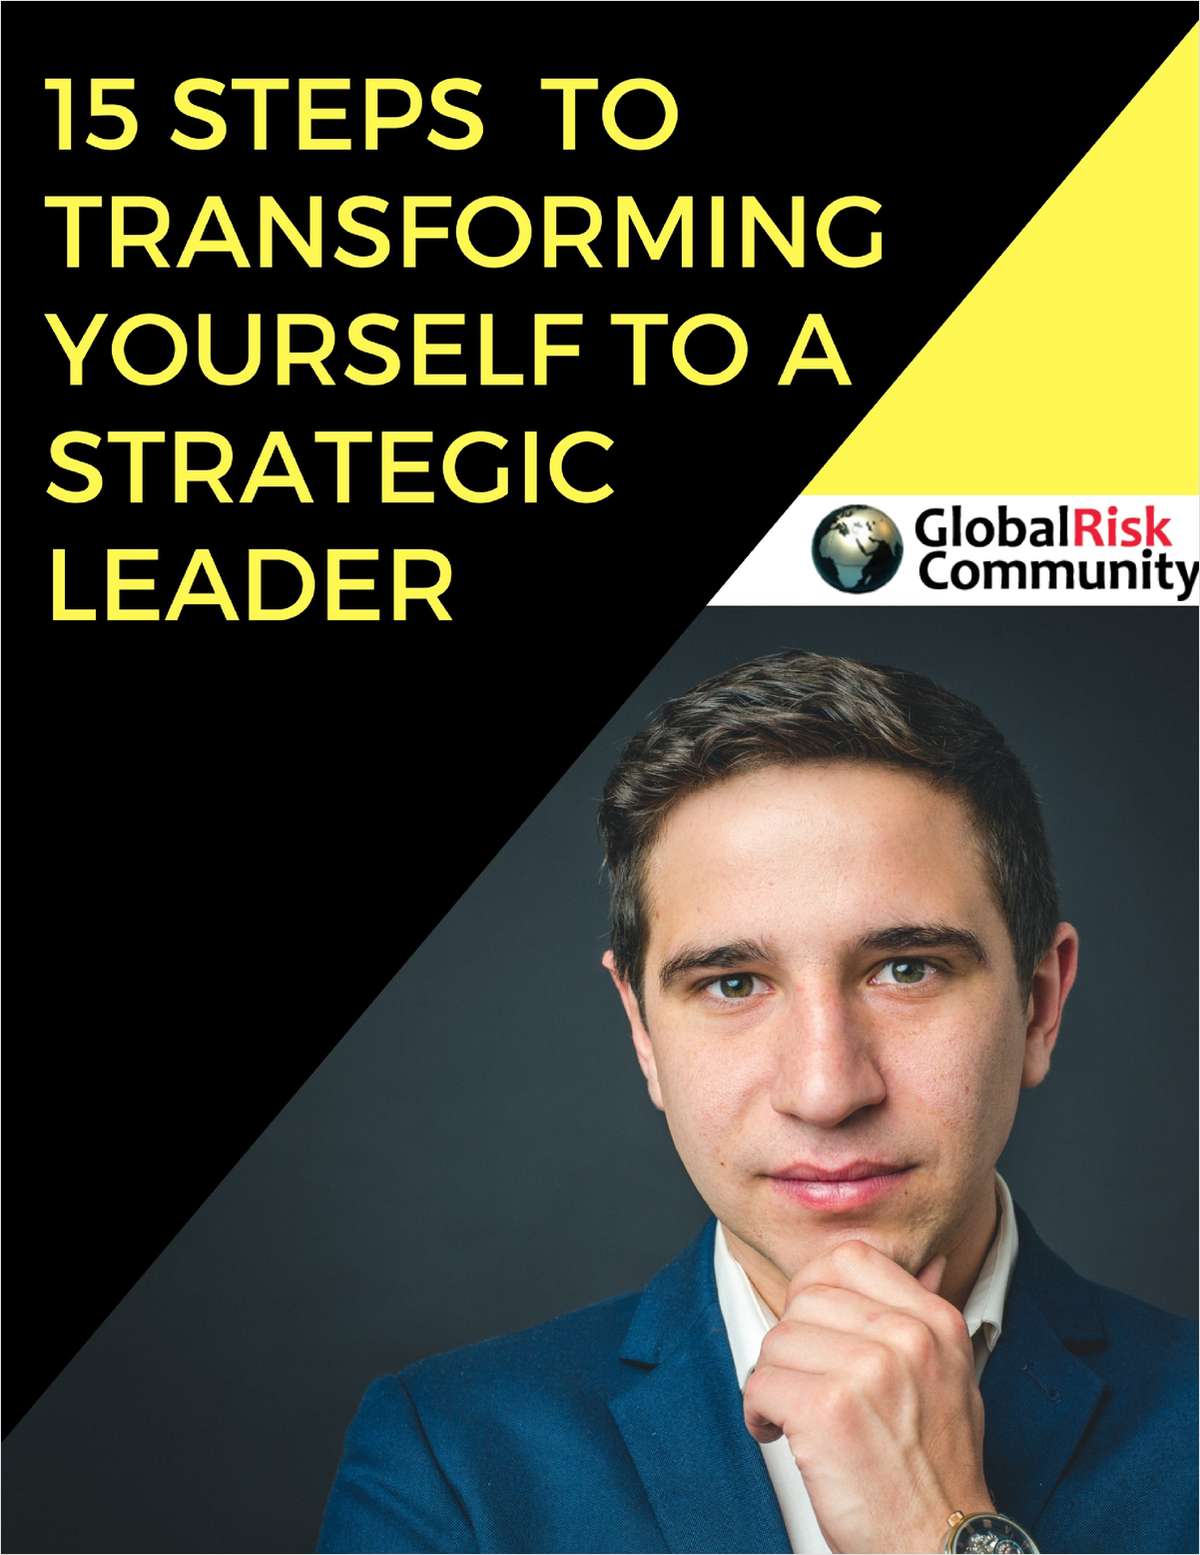 15 Steps to Transforming Yourself to a Strategic Leader